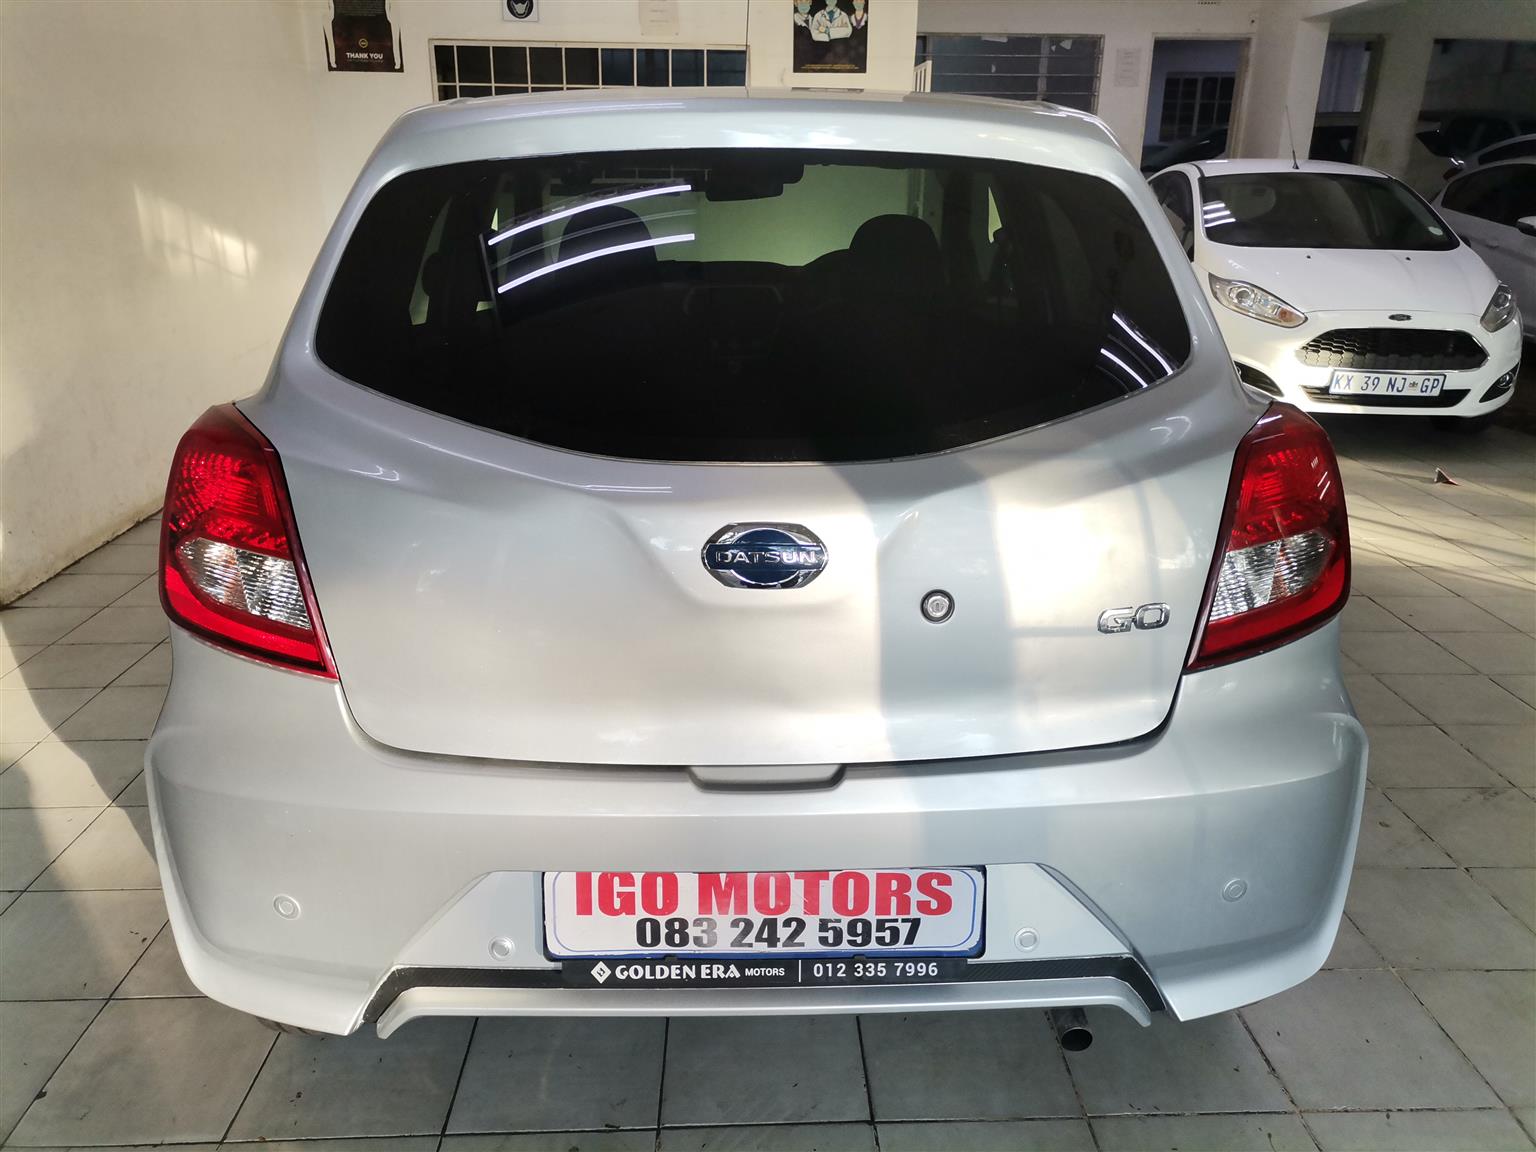 2021 Datsun Go 1.2Lux manual 35000km Mechanically perfect with Full Service Hist